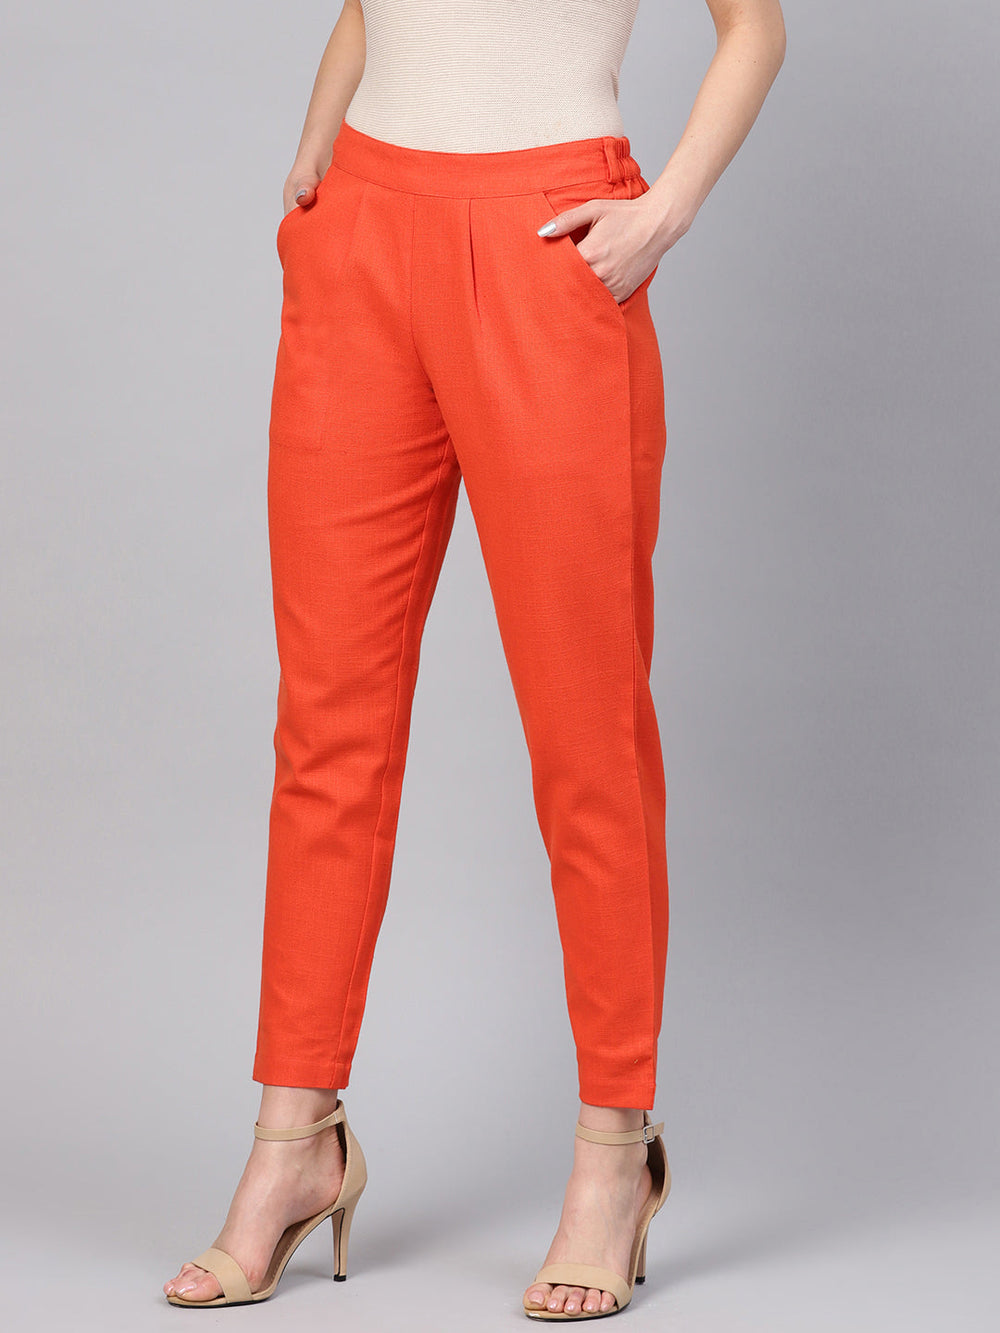 Shop Slim Fit Trousers for women